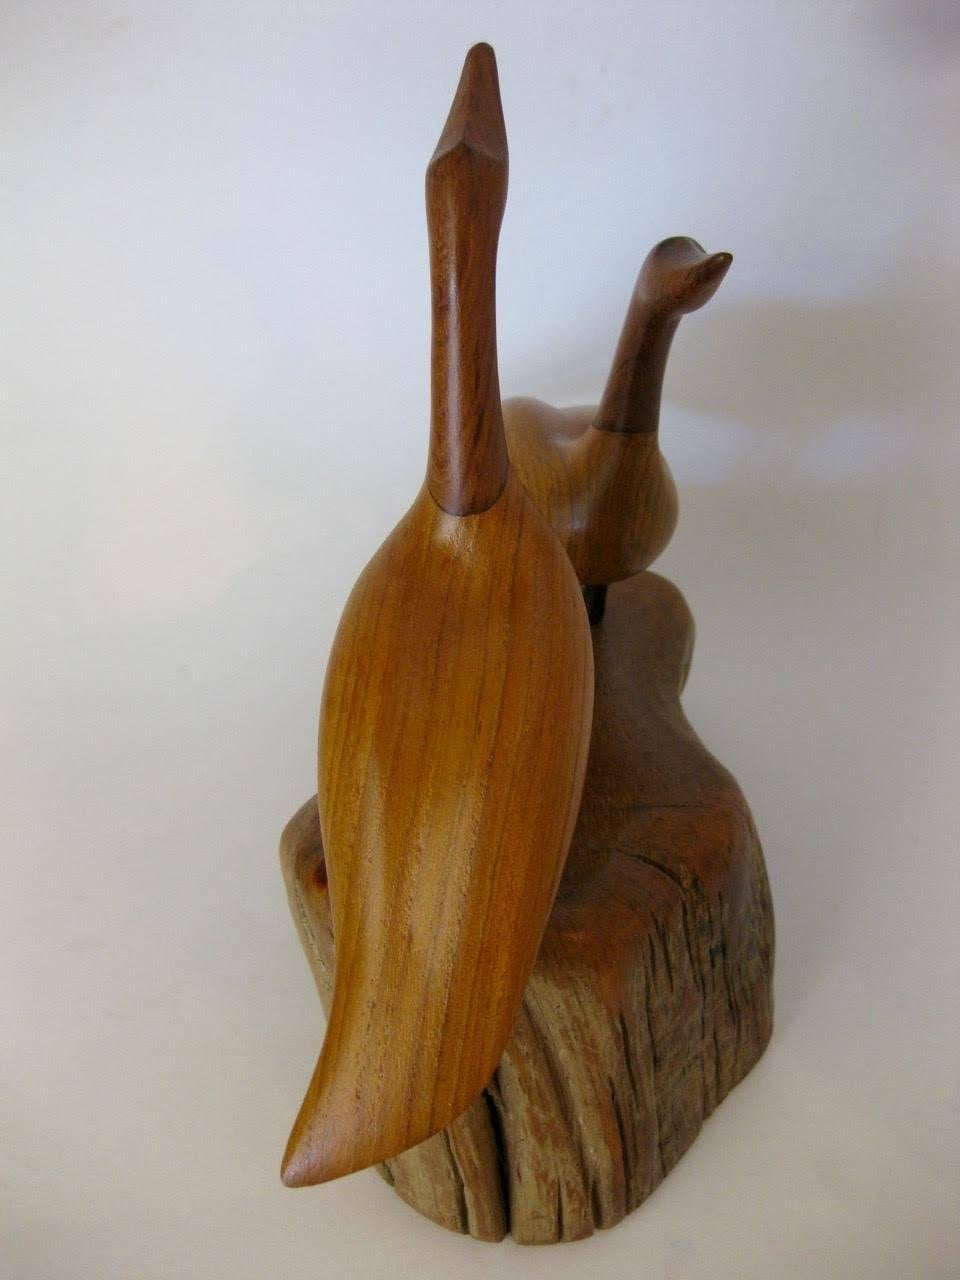 Late 20th Century Walnut and Cherry Carved Canadian Geese Sculpture by I. Grantins, Canada